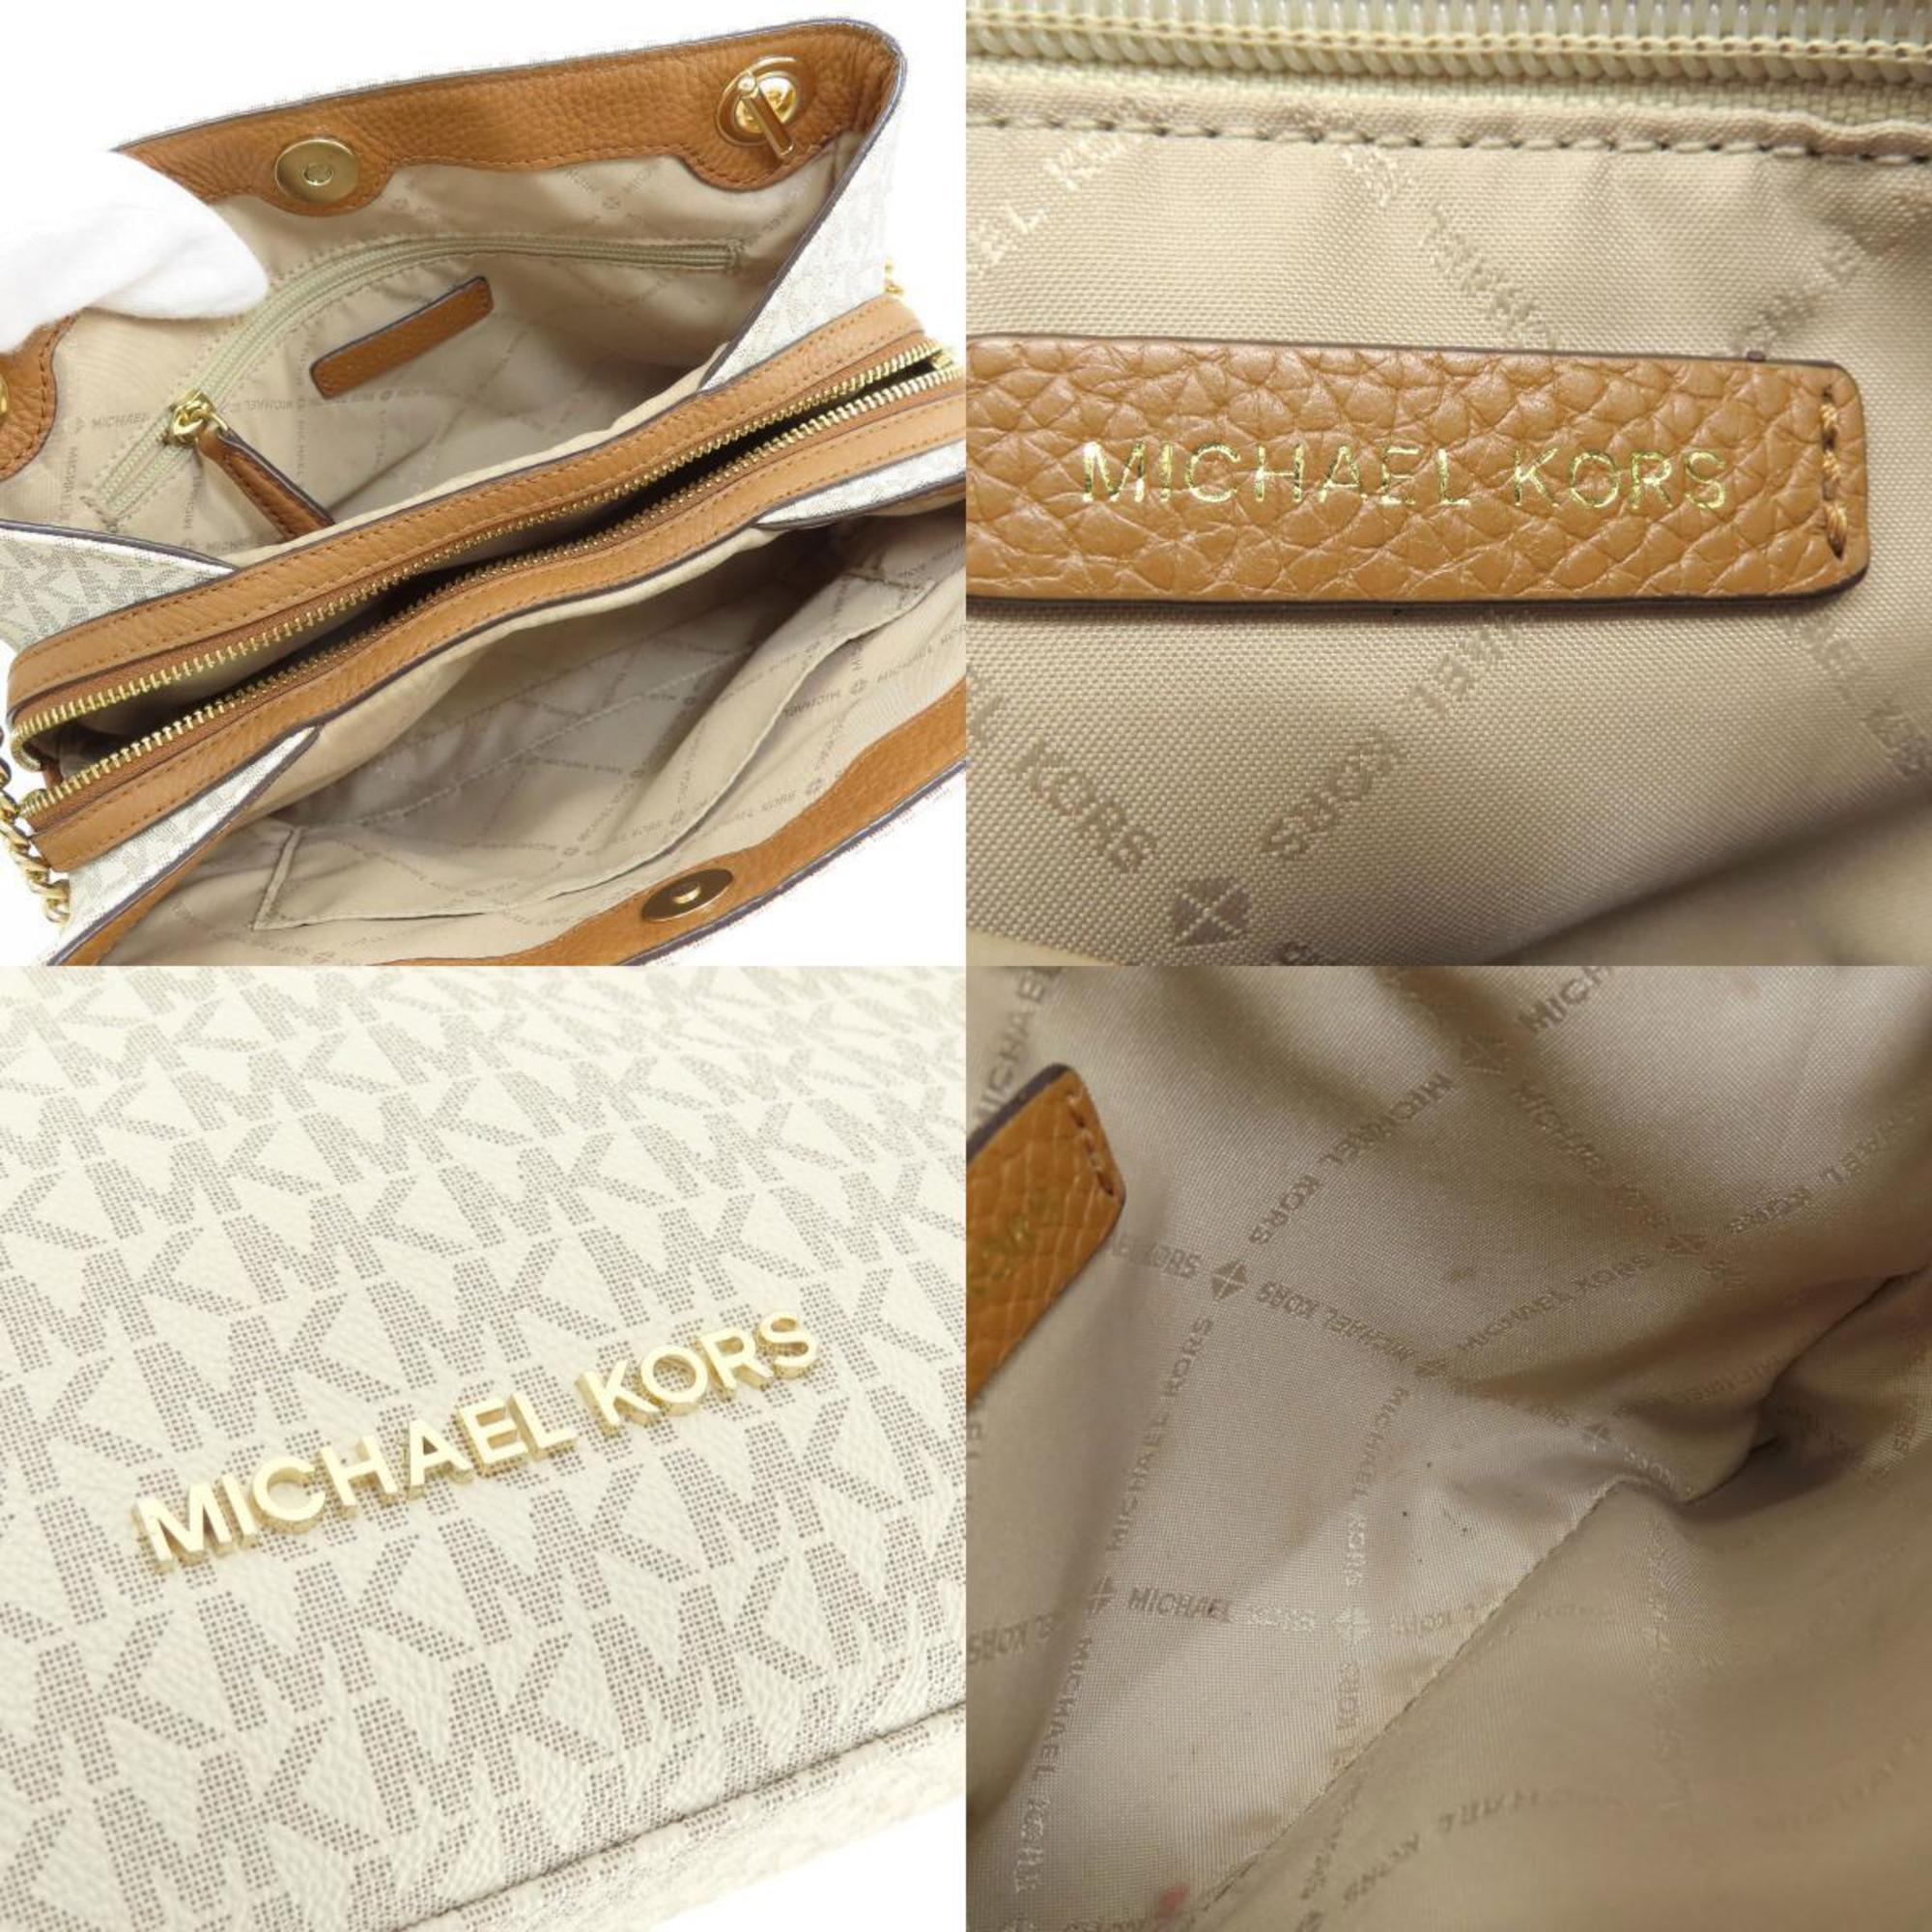 Michael Kors MK Signature Tote Bag Leather/Coated Canvas Women's